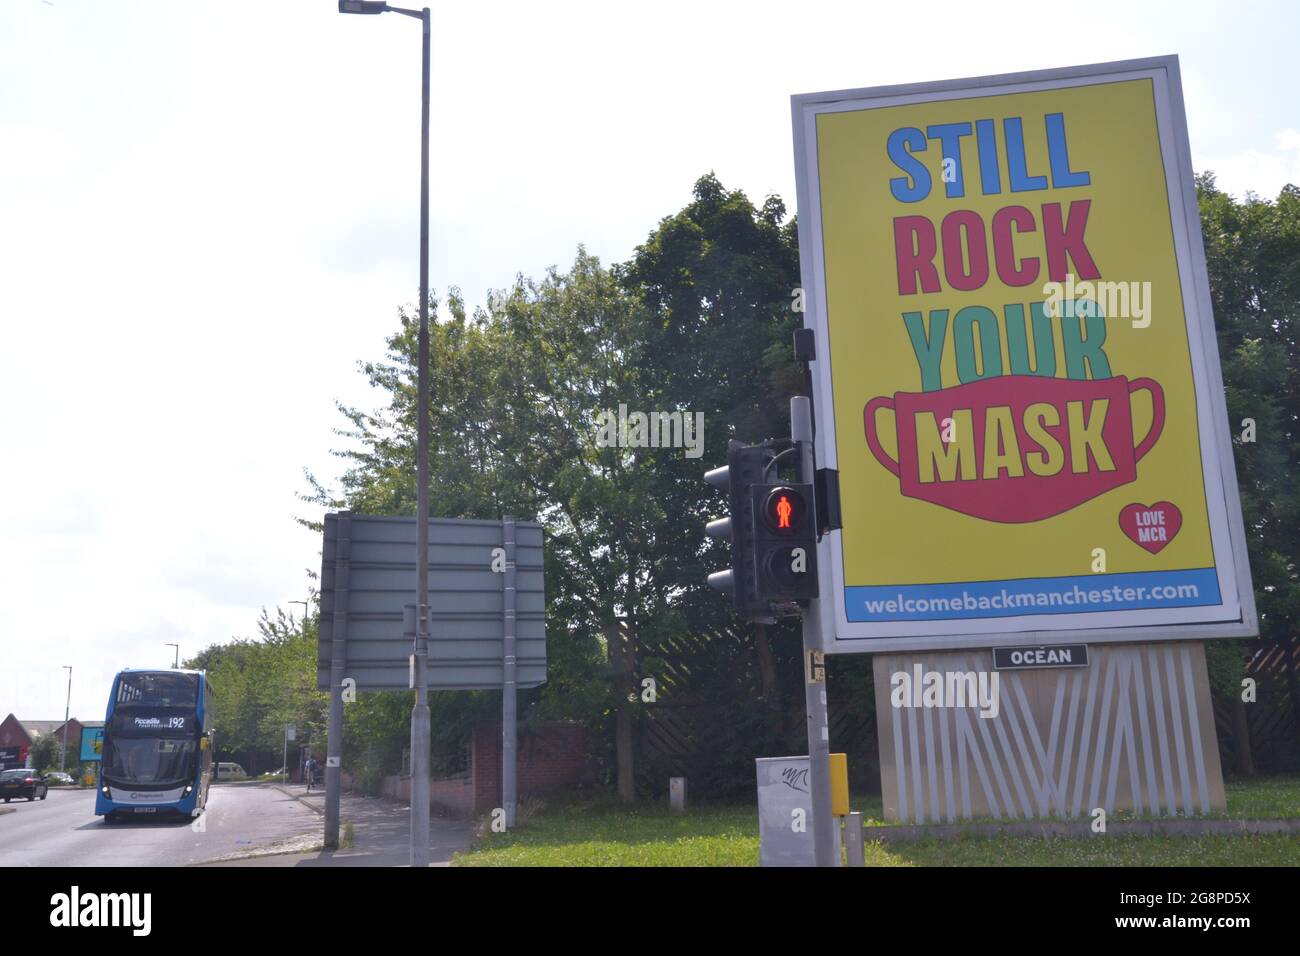 Manchester, UK. 22nd July, 2021. Most recent figures for Greater Manchester:308 patients with the Covid virus were admitted to NHS hospitals in the week to 11th July, an increase of 29 per cent on the prior week. Sign in Manchester encourages people to wear a mask. Credit: Terry Waller/Alamy Live News Stock Photo